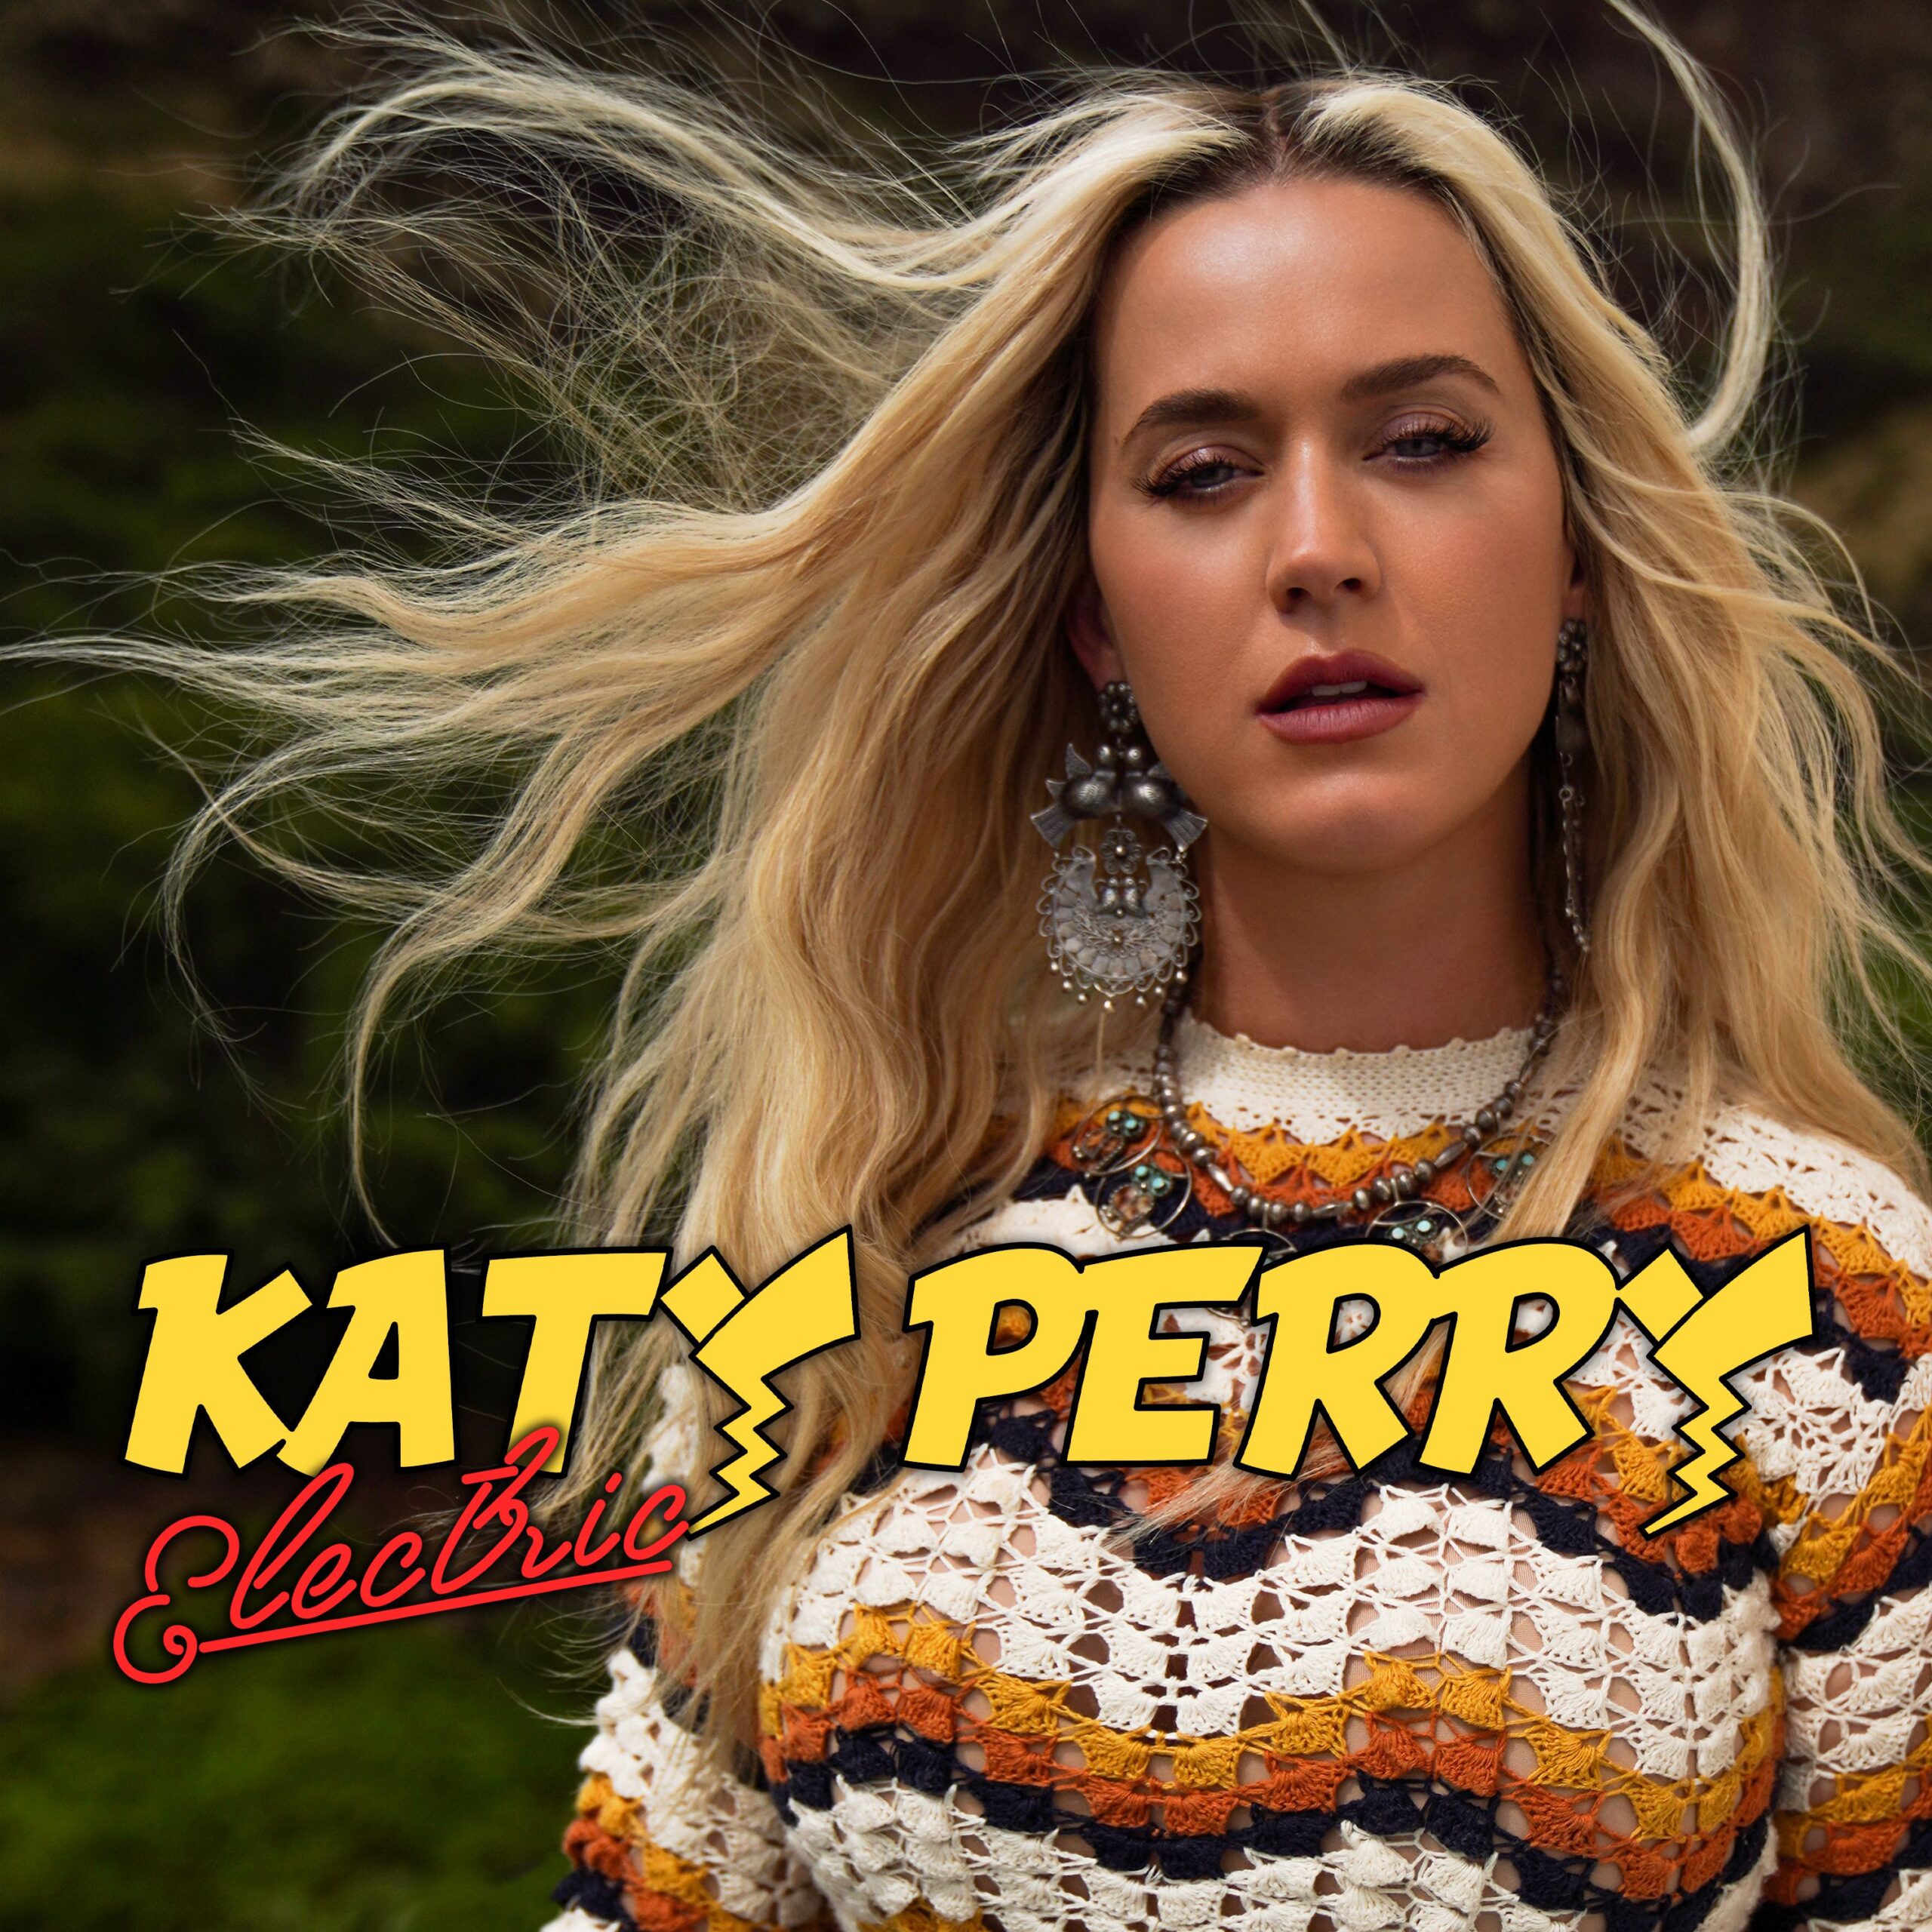 Electric (Katy Perry) font